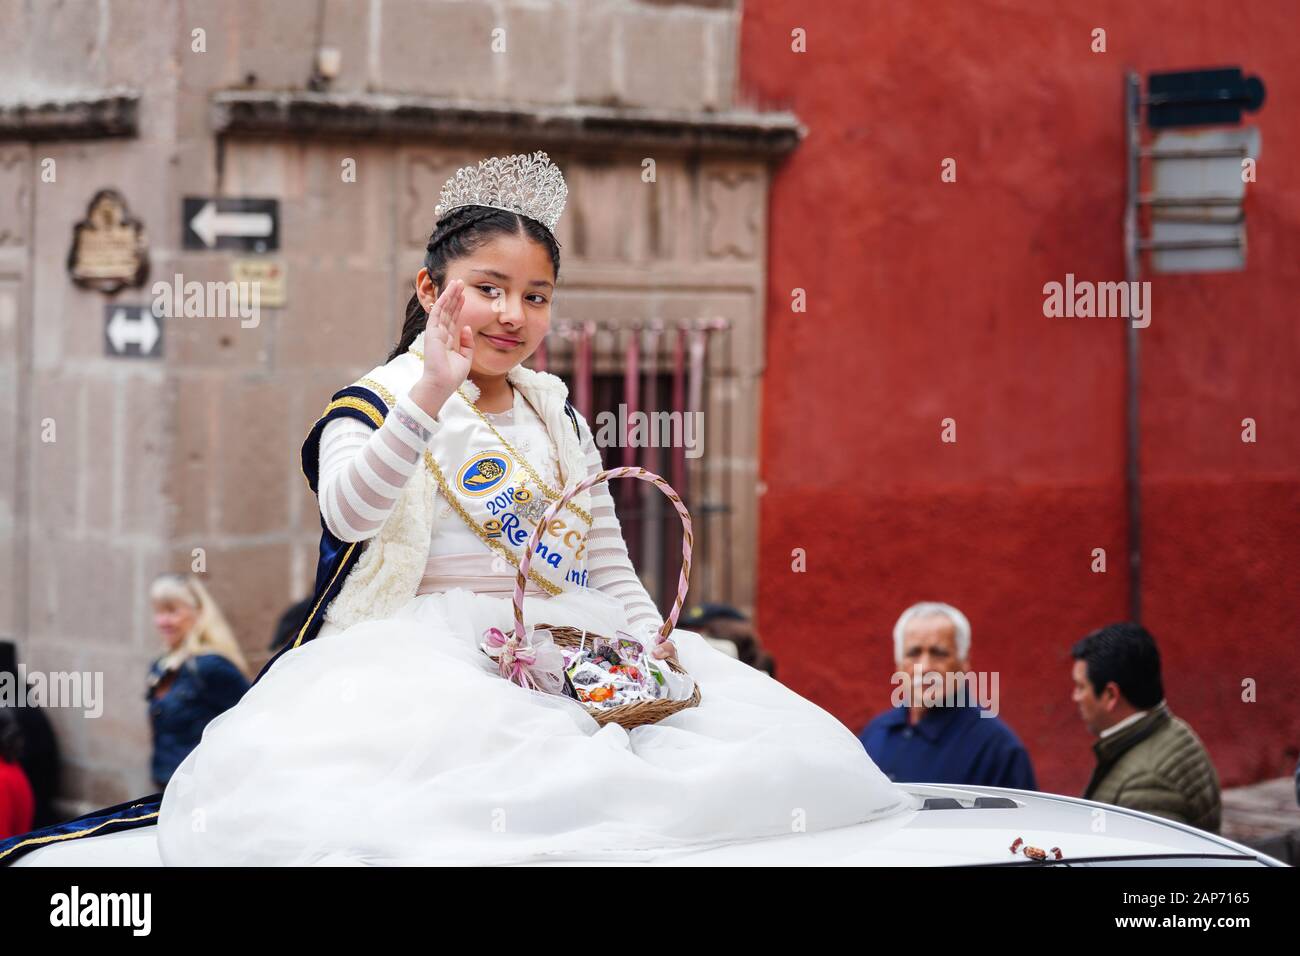 San Miguel De Allende, Mexico. 21st Jan, 2020. A young beauty queen waves during a parade through the streets to celebrate the 251st birthday of the Mexican Independence hero Ignacio Allende January 21, 2020 in San Miguel de Allende, Guanajuato, Mexico. Allende, from a wealthy family in San Miguel played a major role in the independency war against Spain in 1810 and later honored by his home city by adding his name. Credit: Planetpix/Alamy Live News Stock Photo